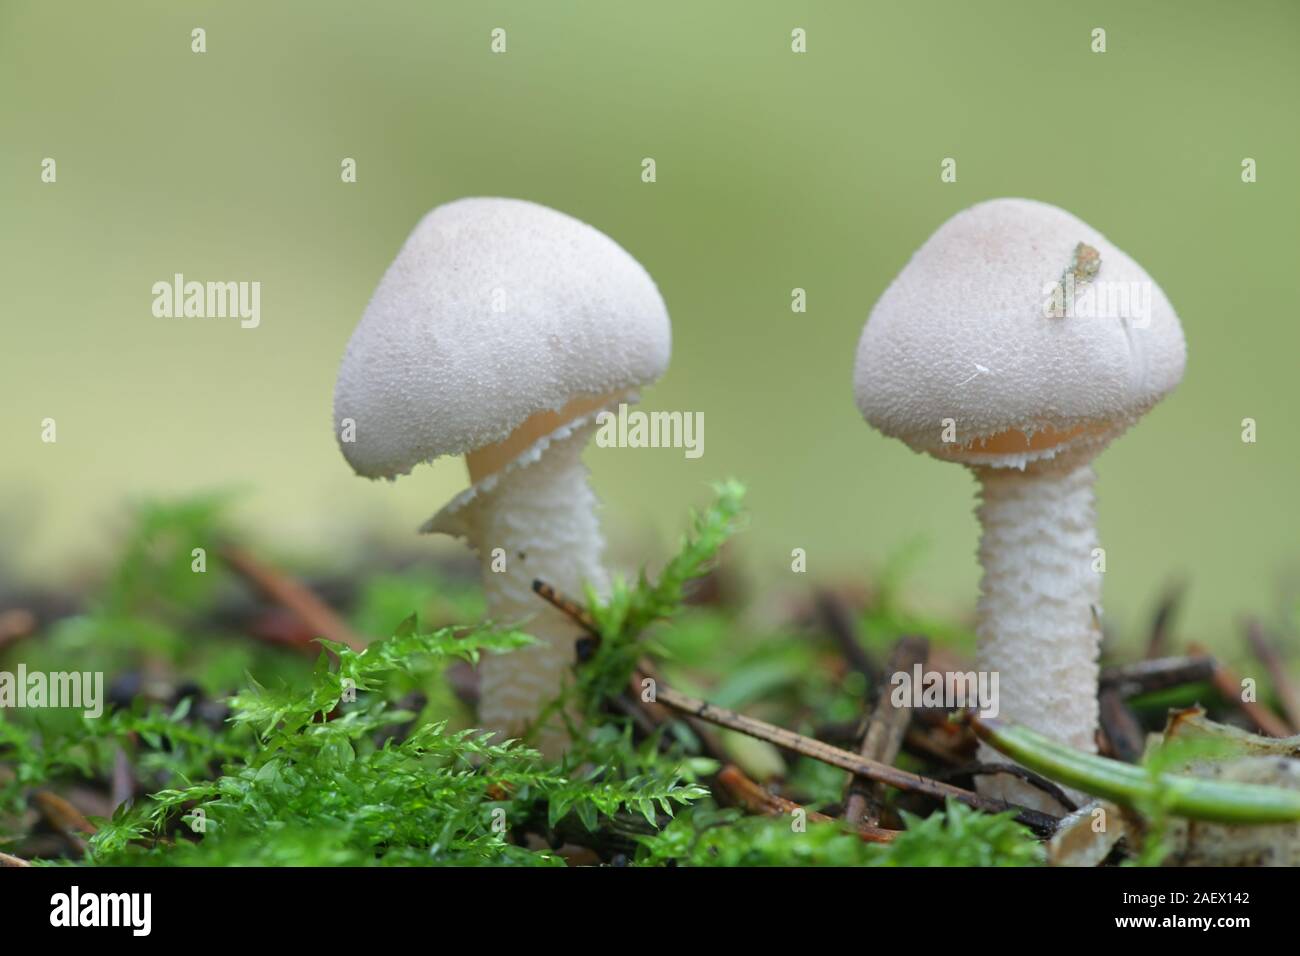 Cystoderma carcharias, known as Pearly Powdercap, mushrooms from Finland Stock Photo